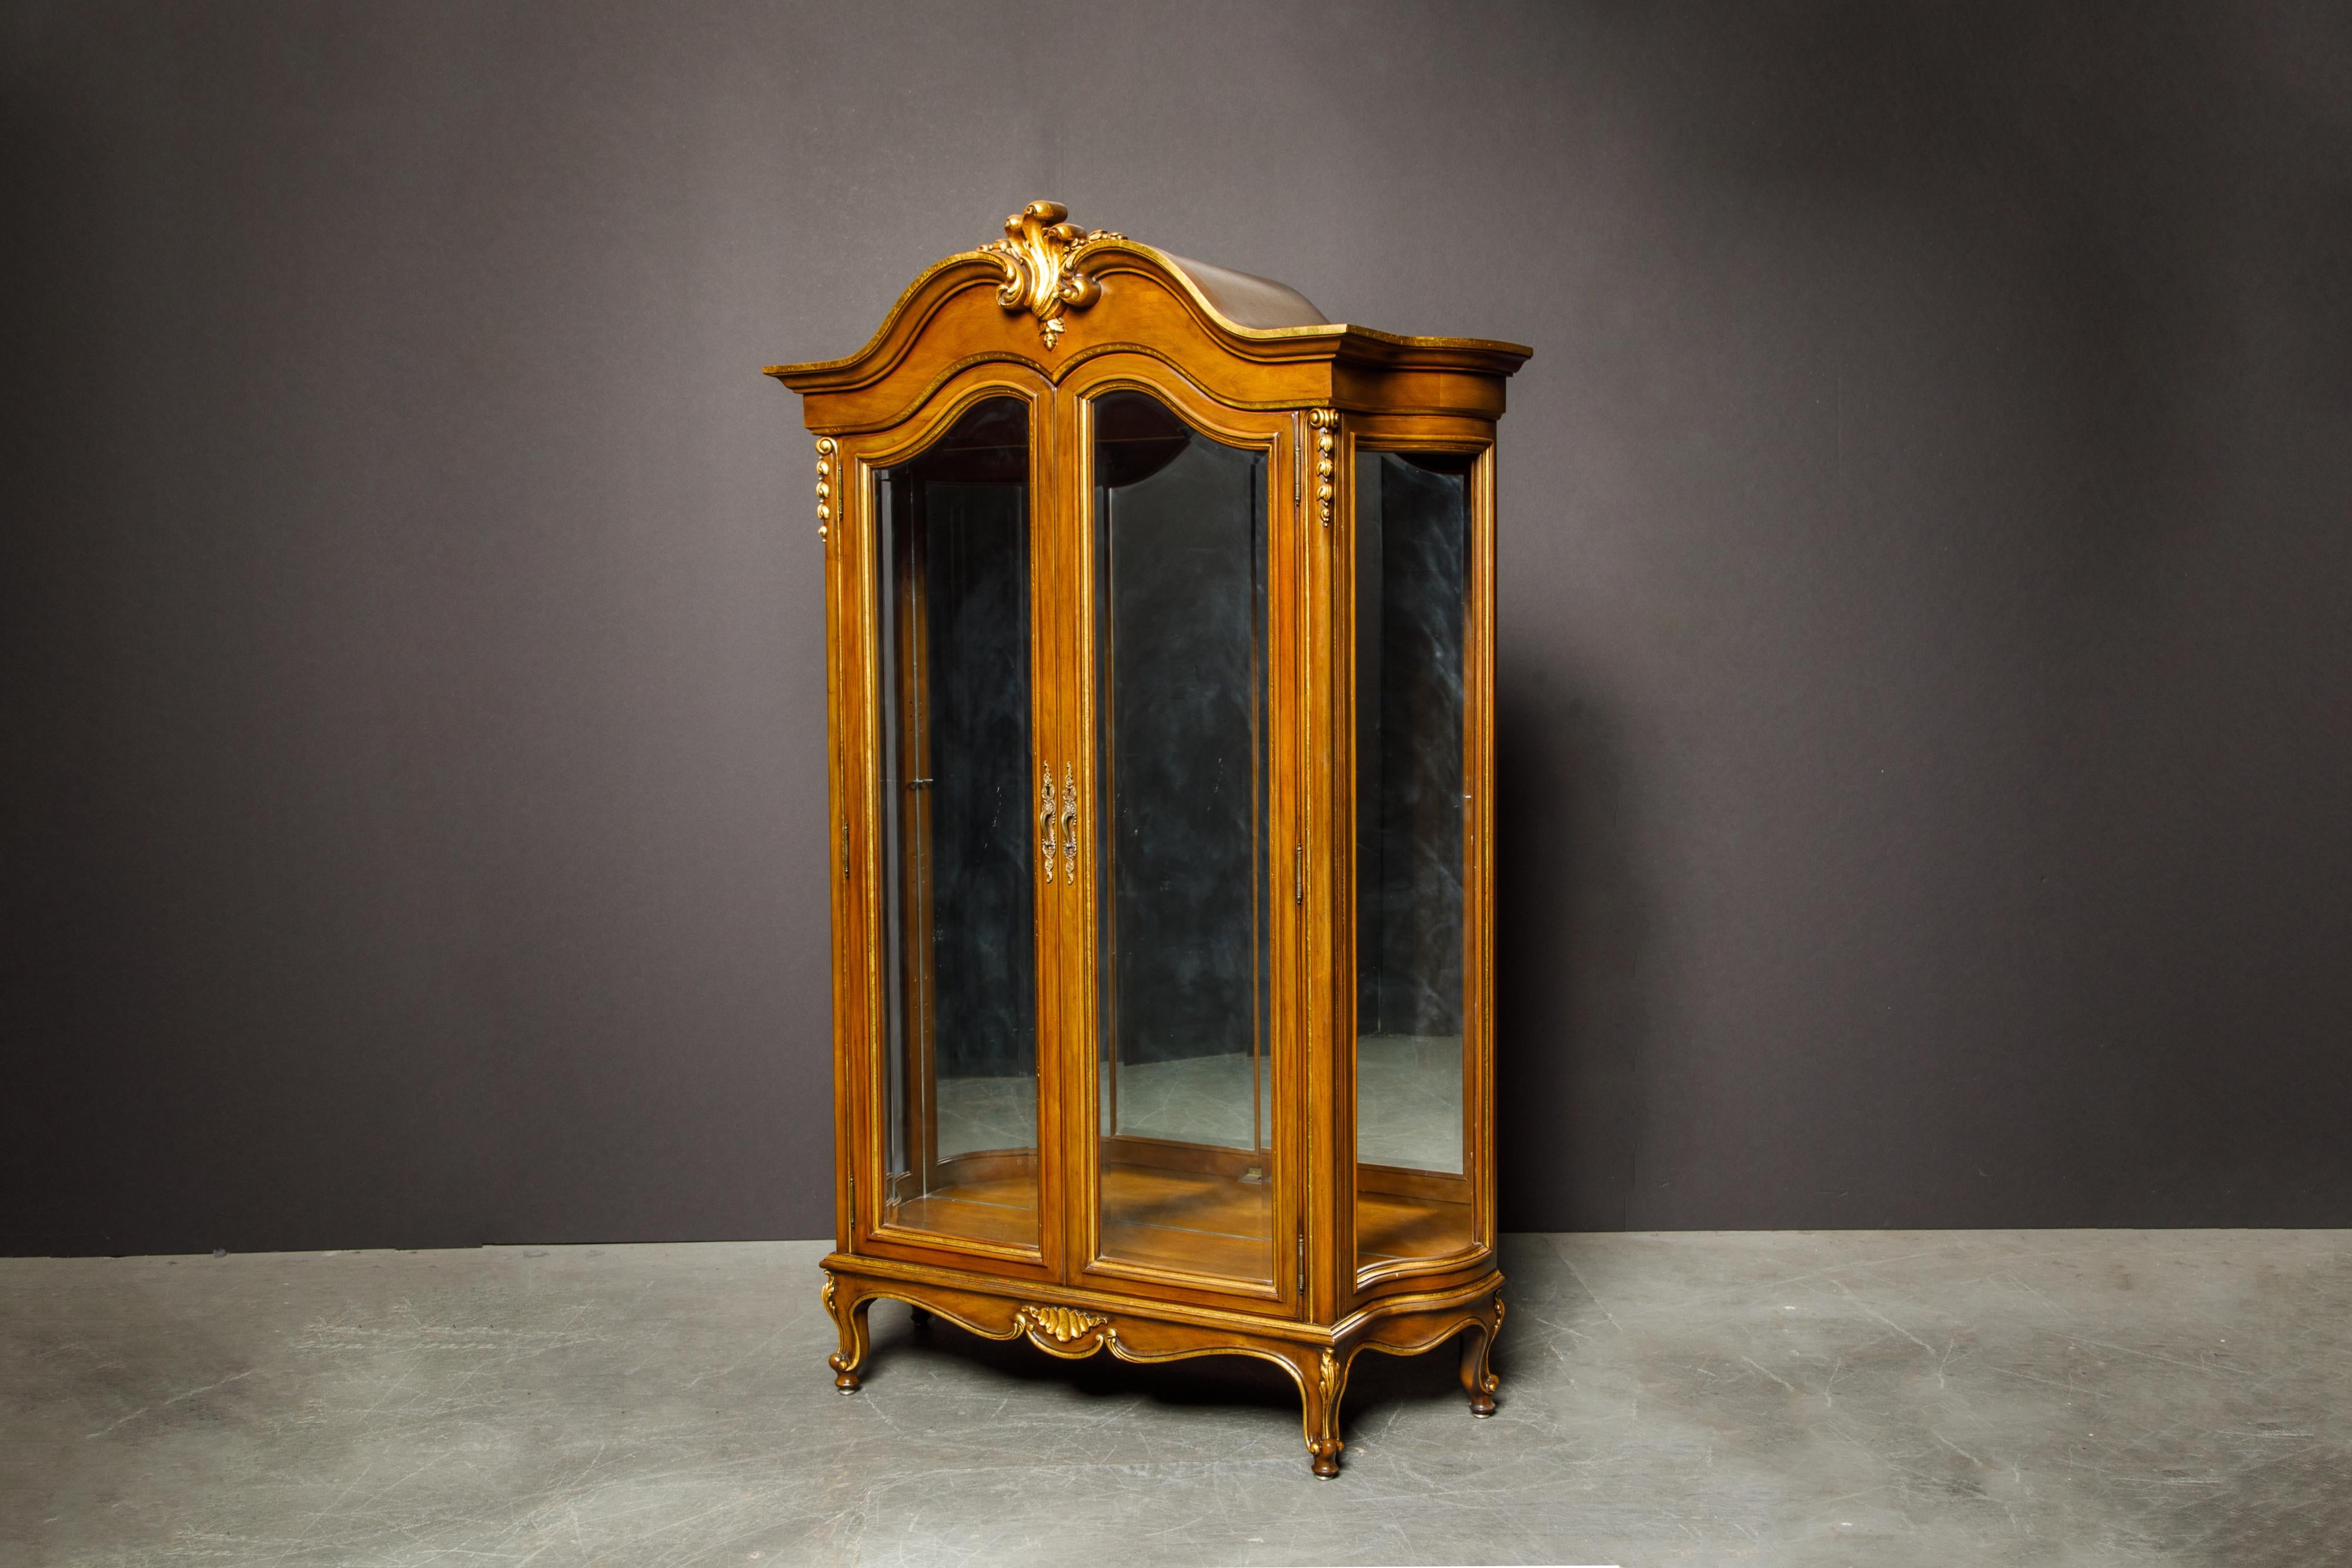 A beautiful gilted French Art Deco vitrine featuring an illuminated and mirrored interior space worthy to place your small treasures to show off to all of your guests, friends and family. 

Note, one side glass panel was broken and needs to be